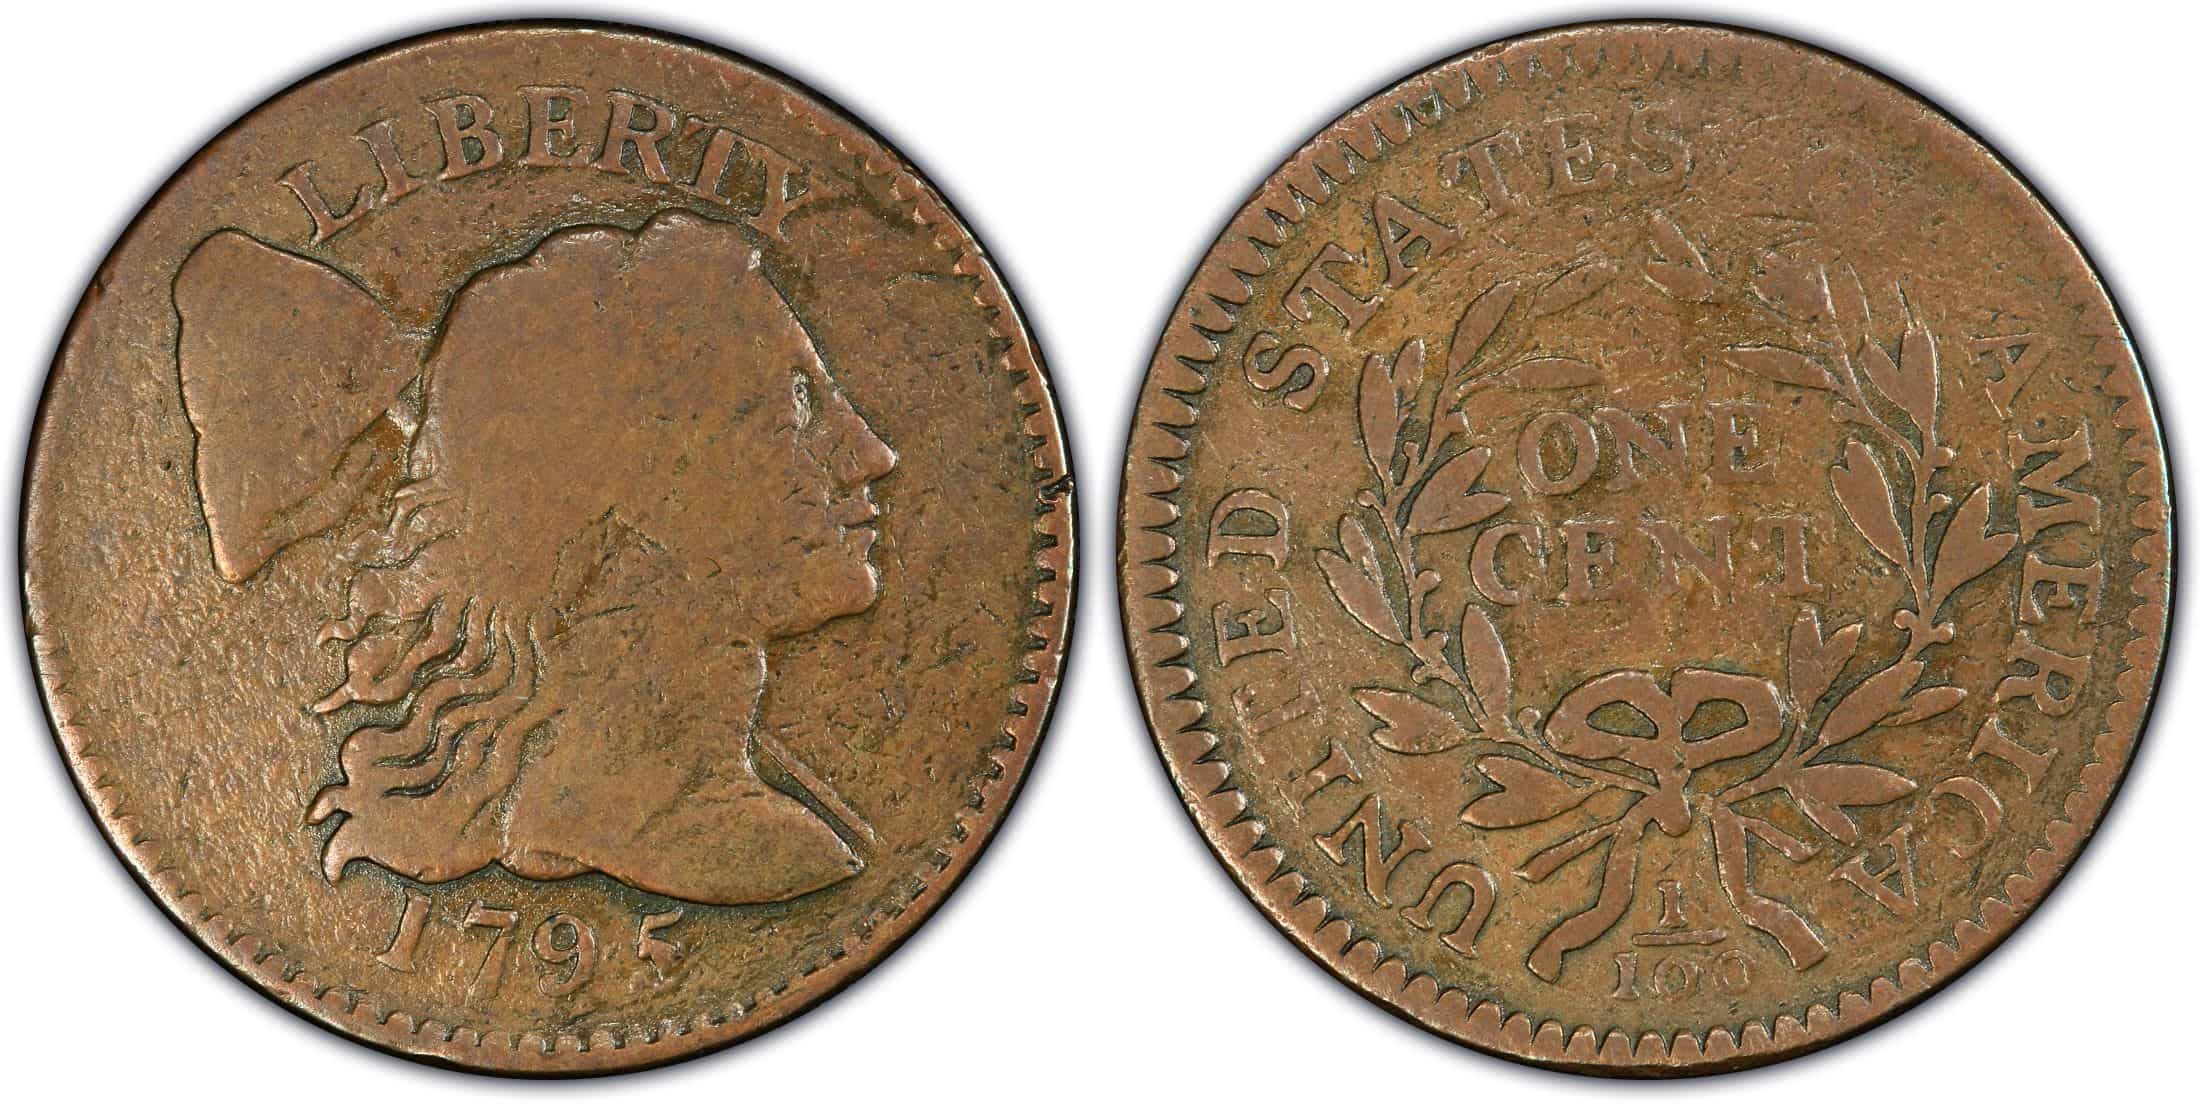 1795 Reeded Edge large cent